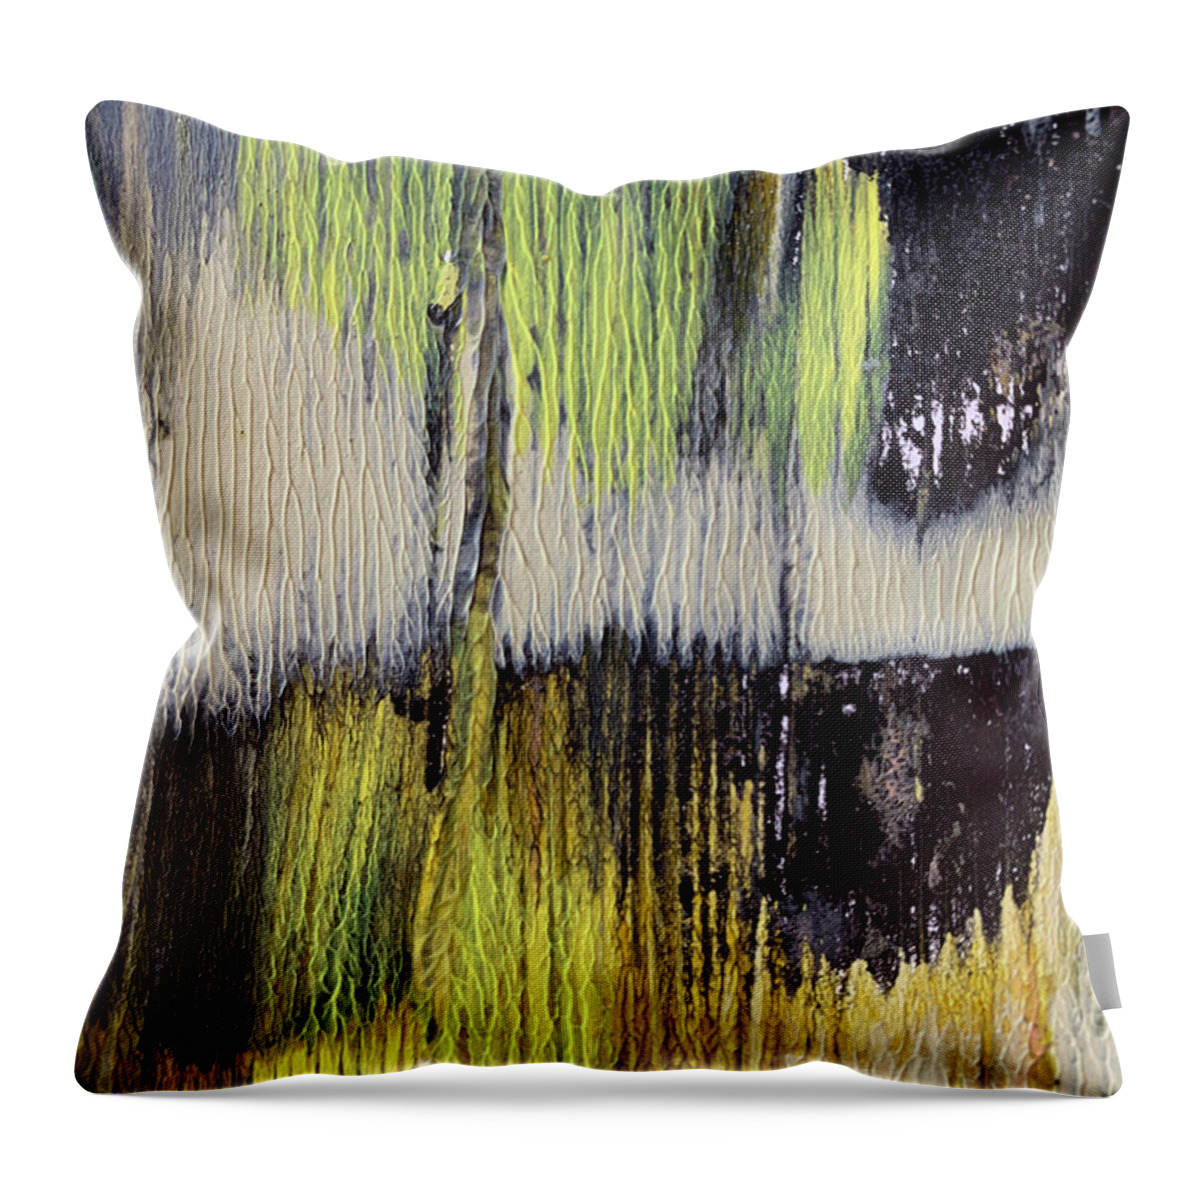 Abstract Throw Pillow featuring the painting Green Black Yellow Gold White Abstract by Lorena Cassady